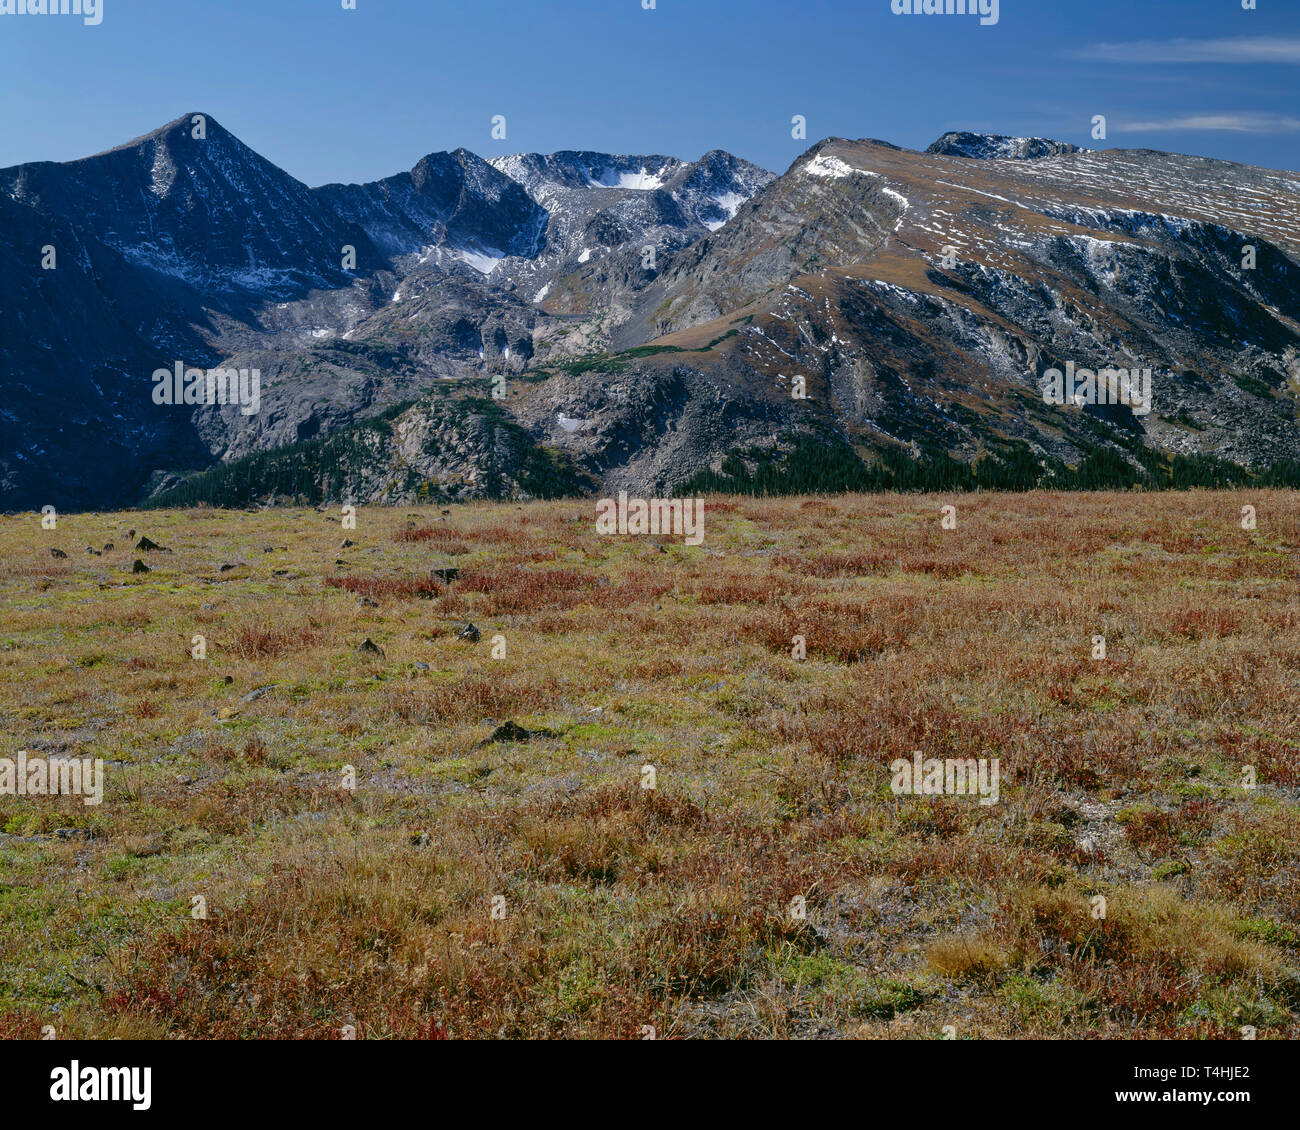 USA, Colorado, Rocky Mountain National Park, Mt. Julian (left) and Mt. Ida (right) rise beyond autumn tundra along the continental divide. Stock Photo